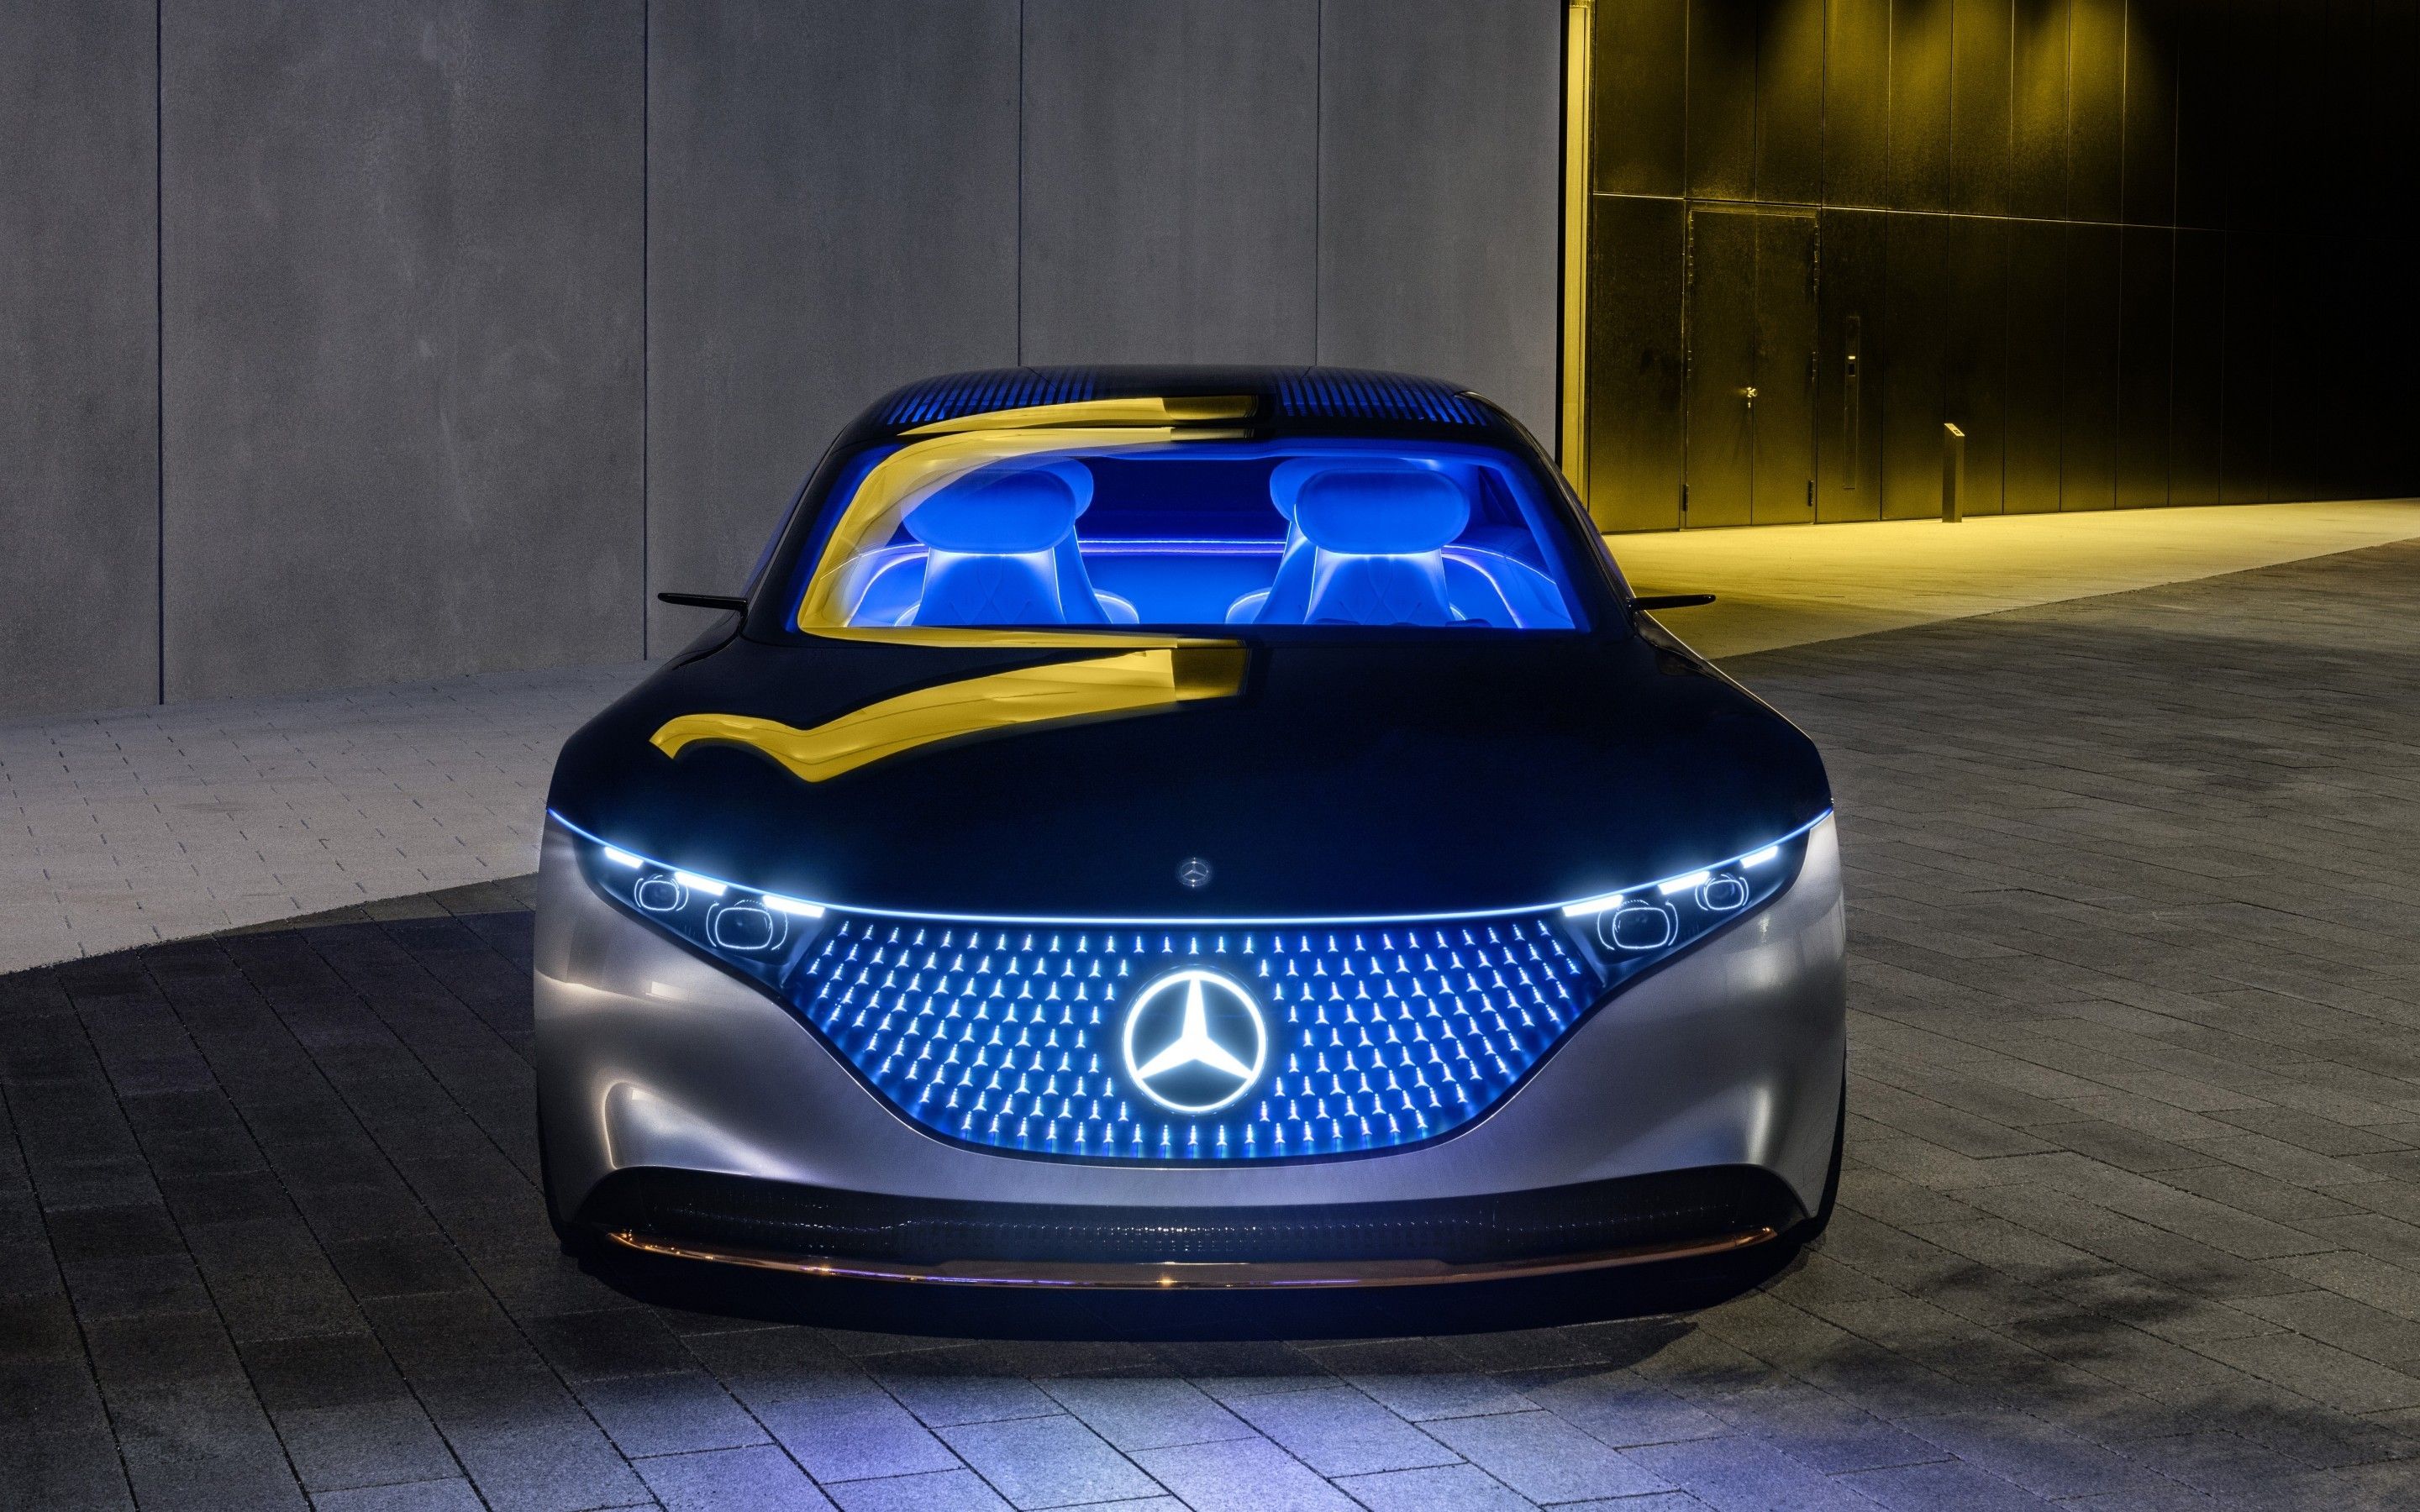 Download 2880x1800 Mercedes Benz Vision Eqs, Front View, Futuristic Cars, Electric Cars Wallpaper For MacBook Pro 15 Inch